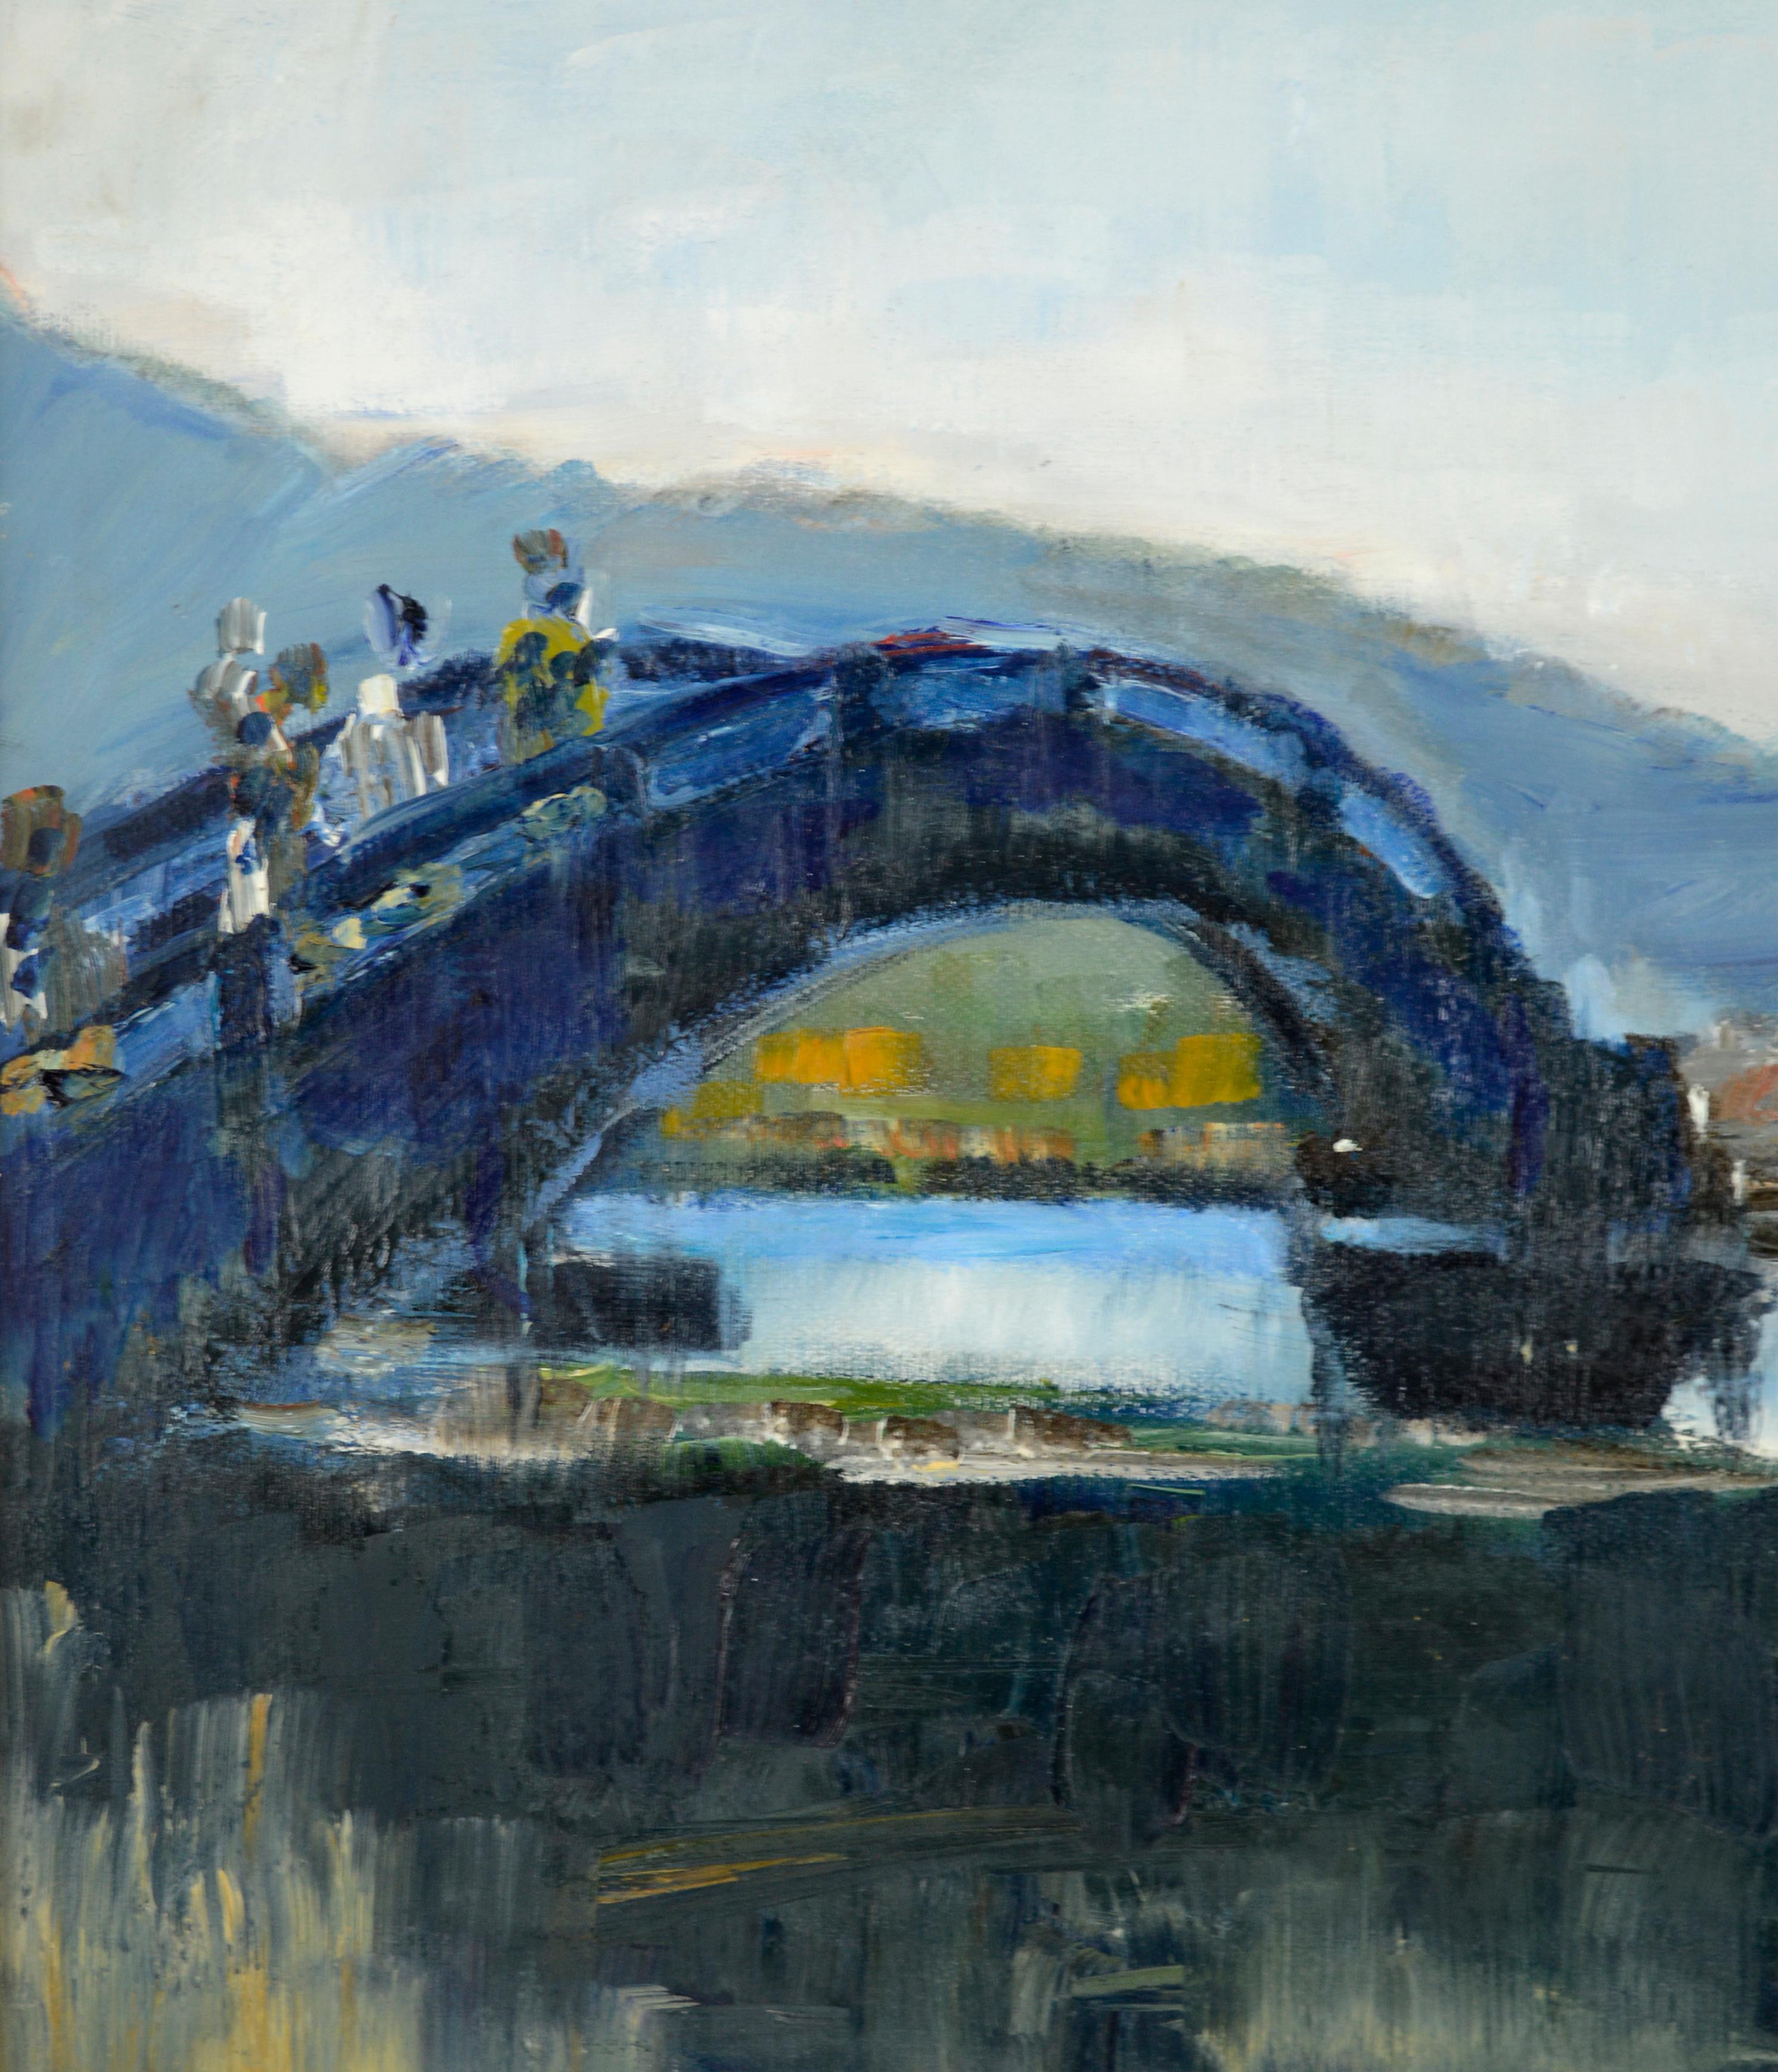 Over the Bridge, Armenia - Mid Century Figurative Landscape  - Brown Figurative Painting by Hovanessian